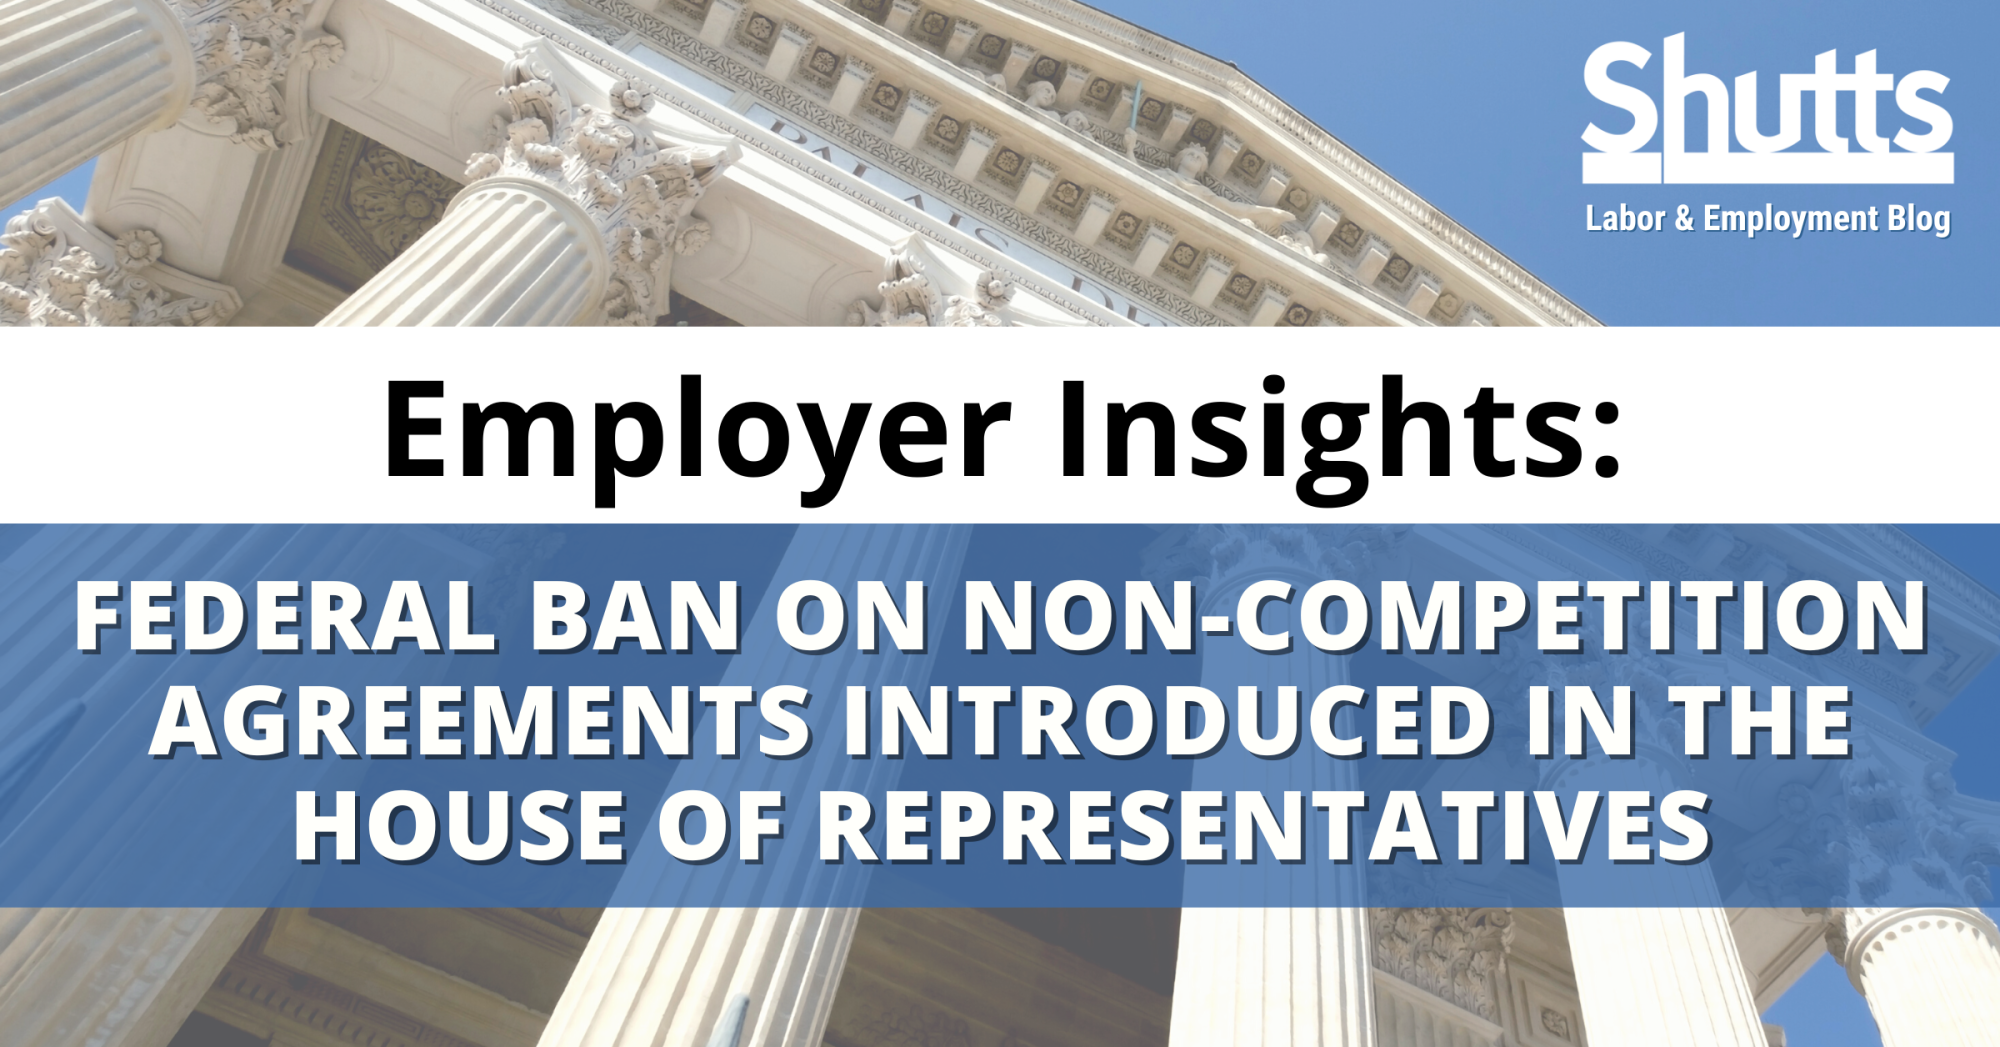 Federal Ban on Non-Competition Agreements Introduced in the House of Representatives